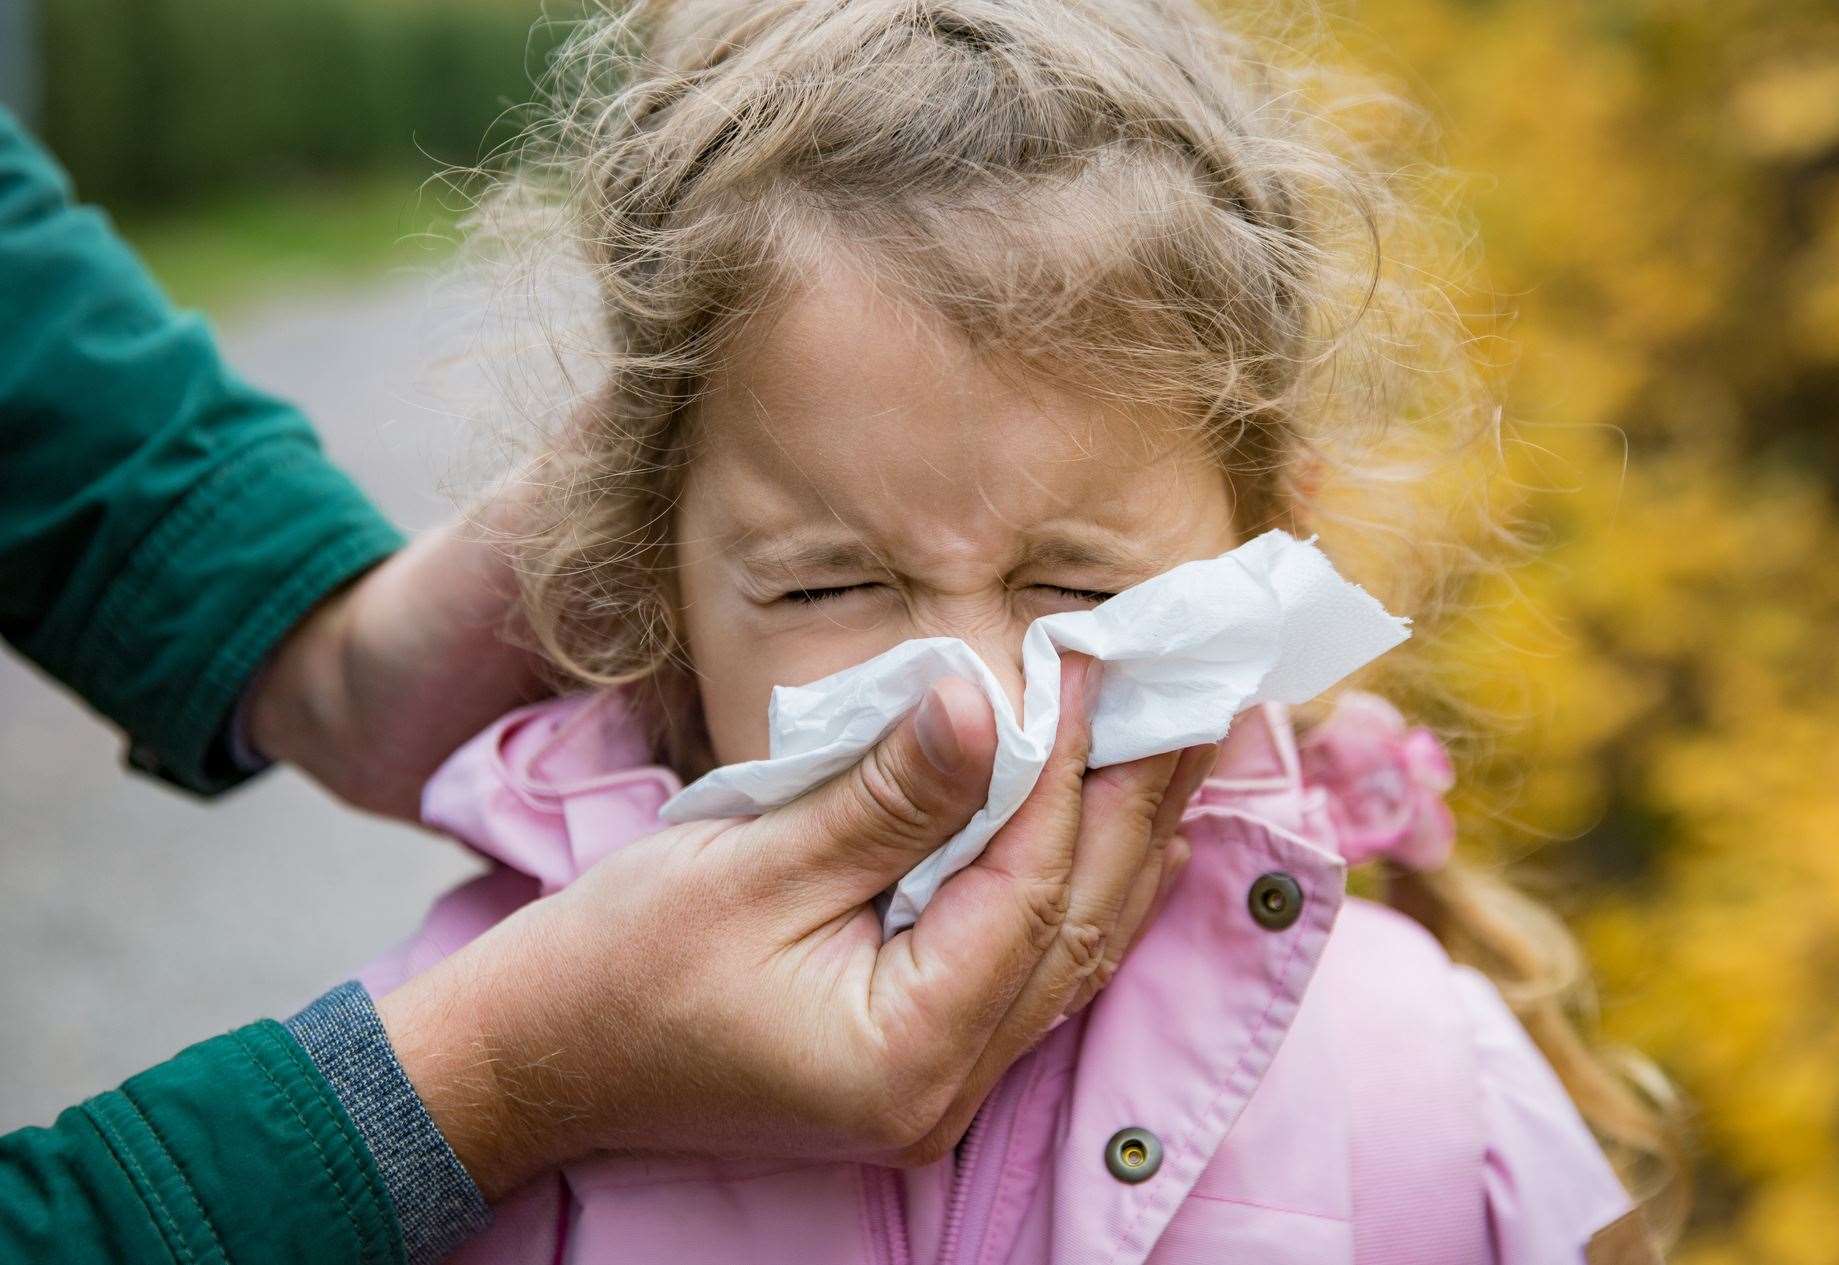 Can my child go to school with a cold, runny nose or sore